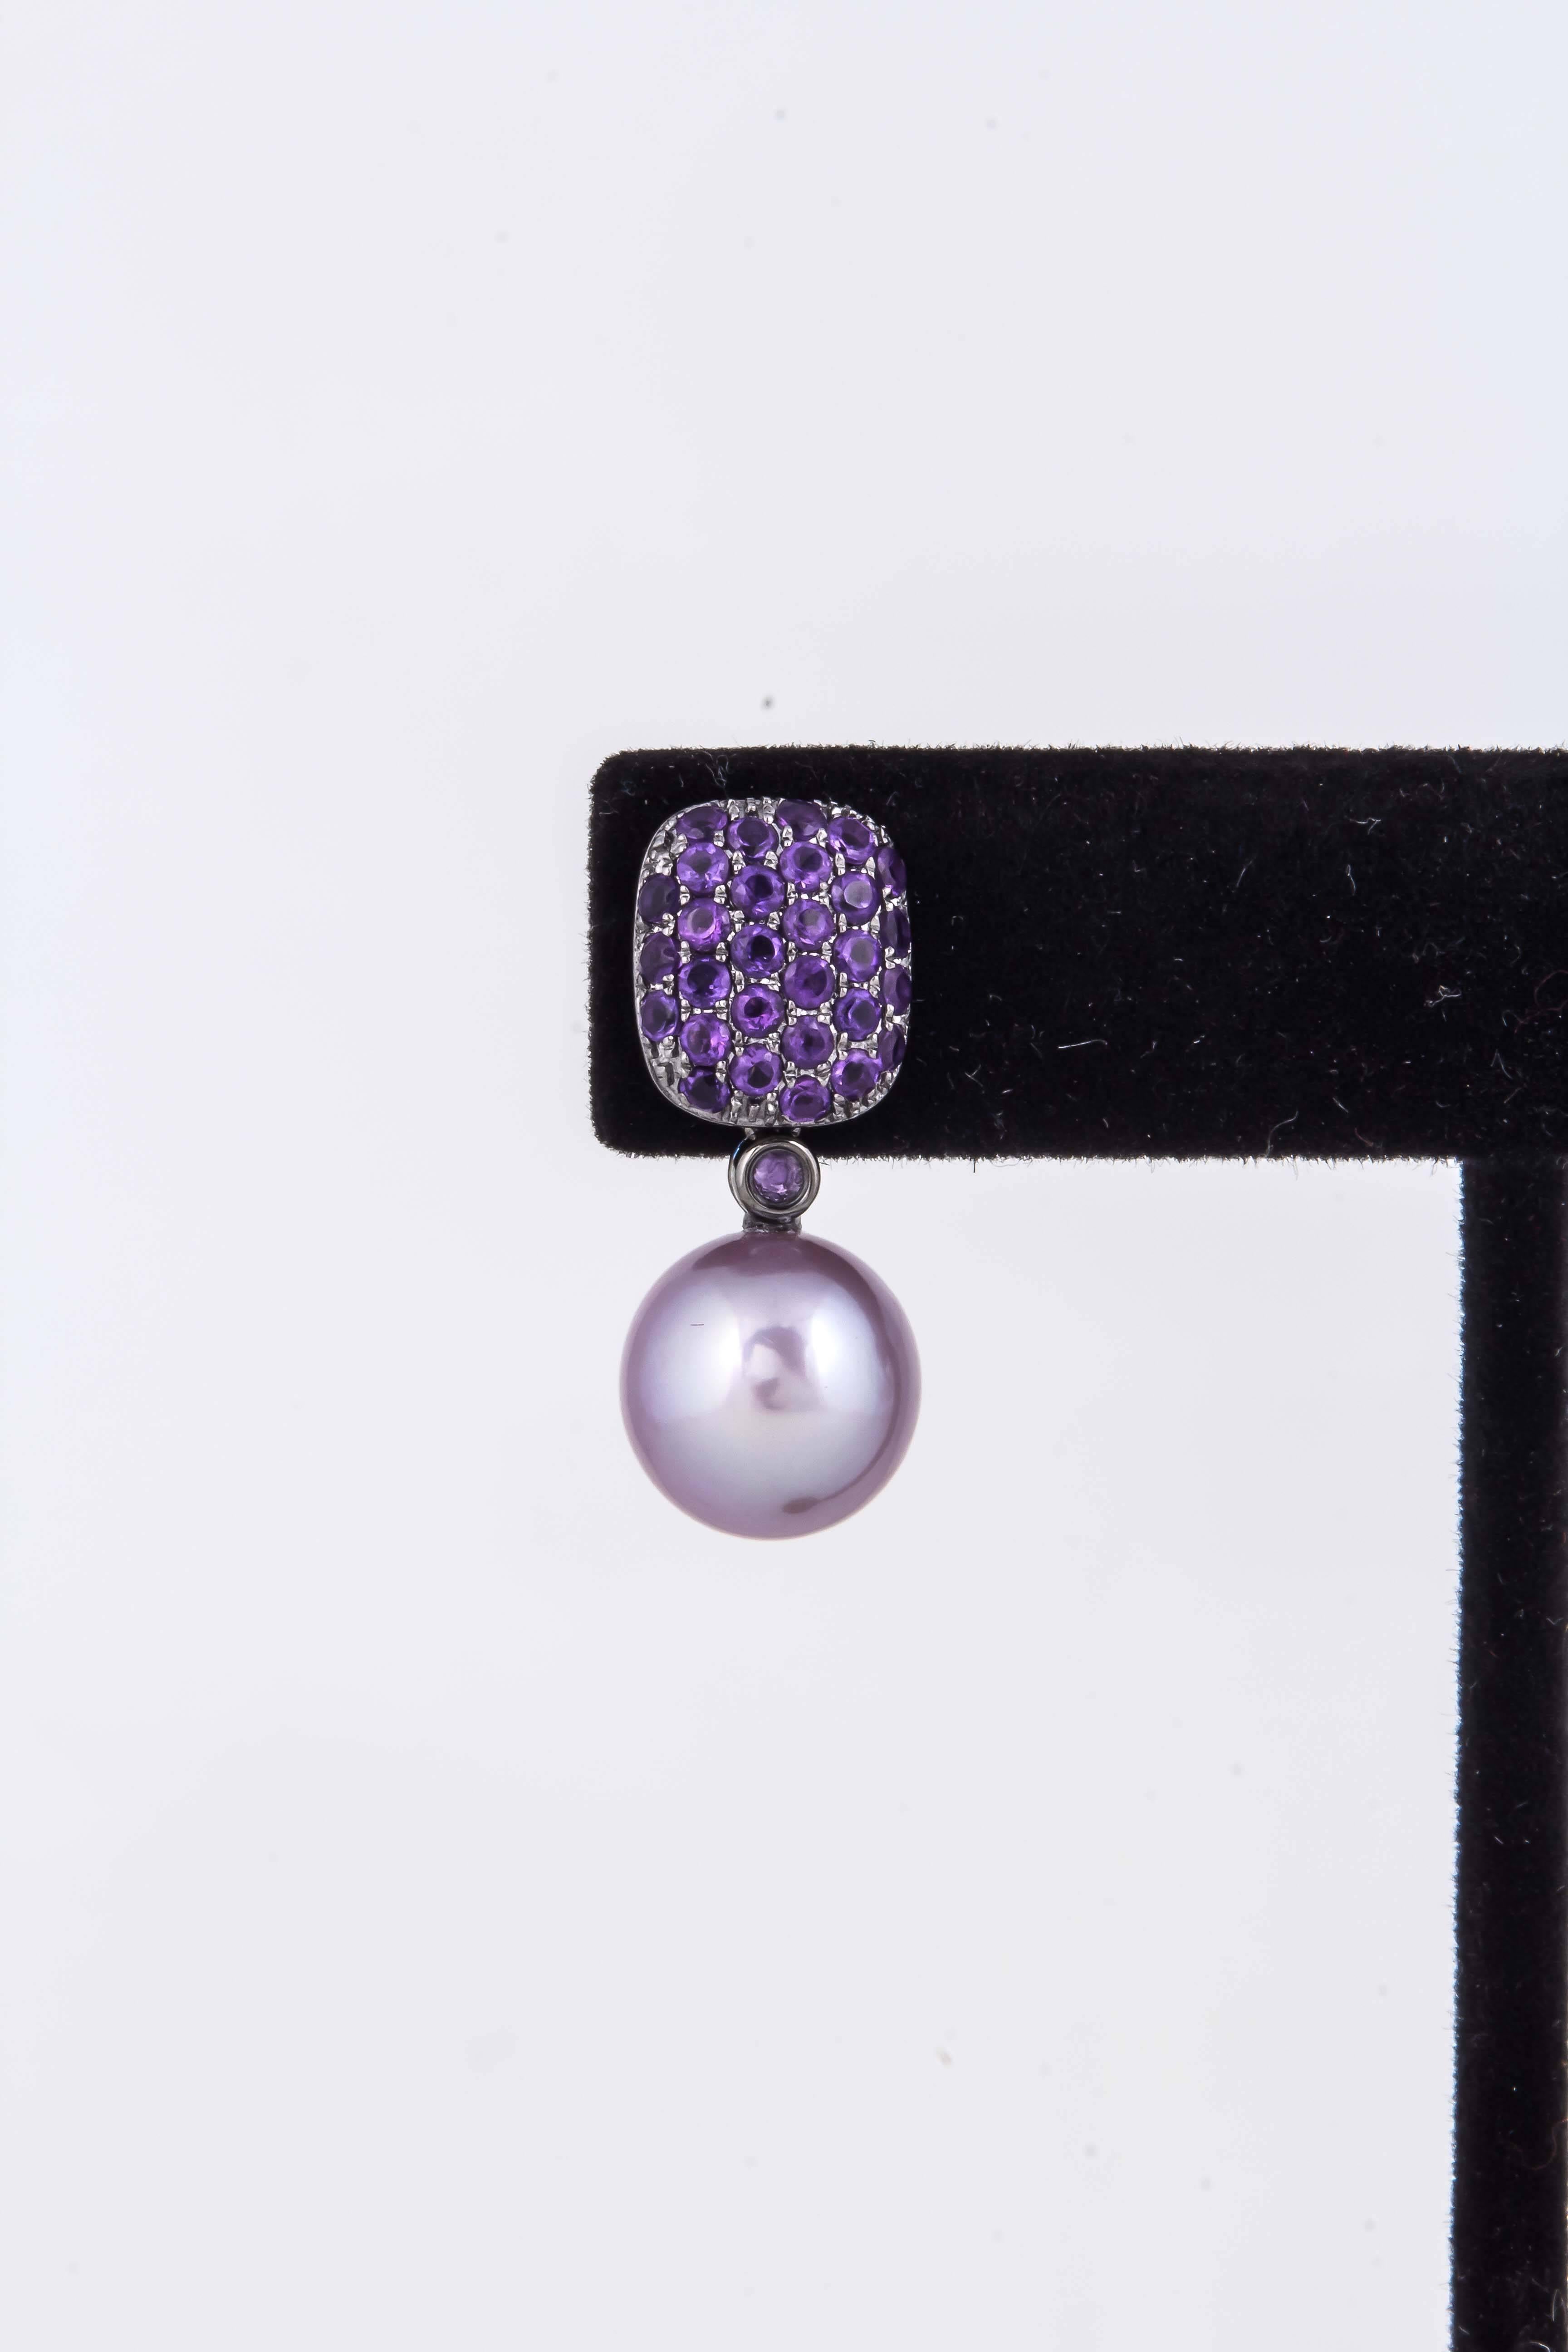 18KB Freshwater Pearl 10-11 mm
Amethyst 1.45 Carats
3.6 G.
The Freshwater pearl can be removed and the earrings can be used as studs